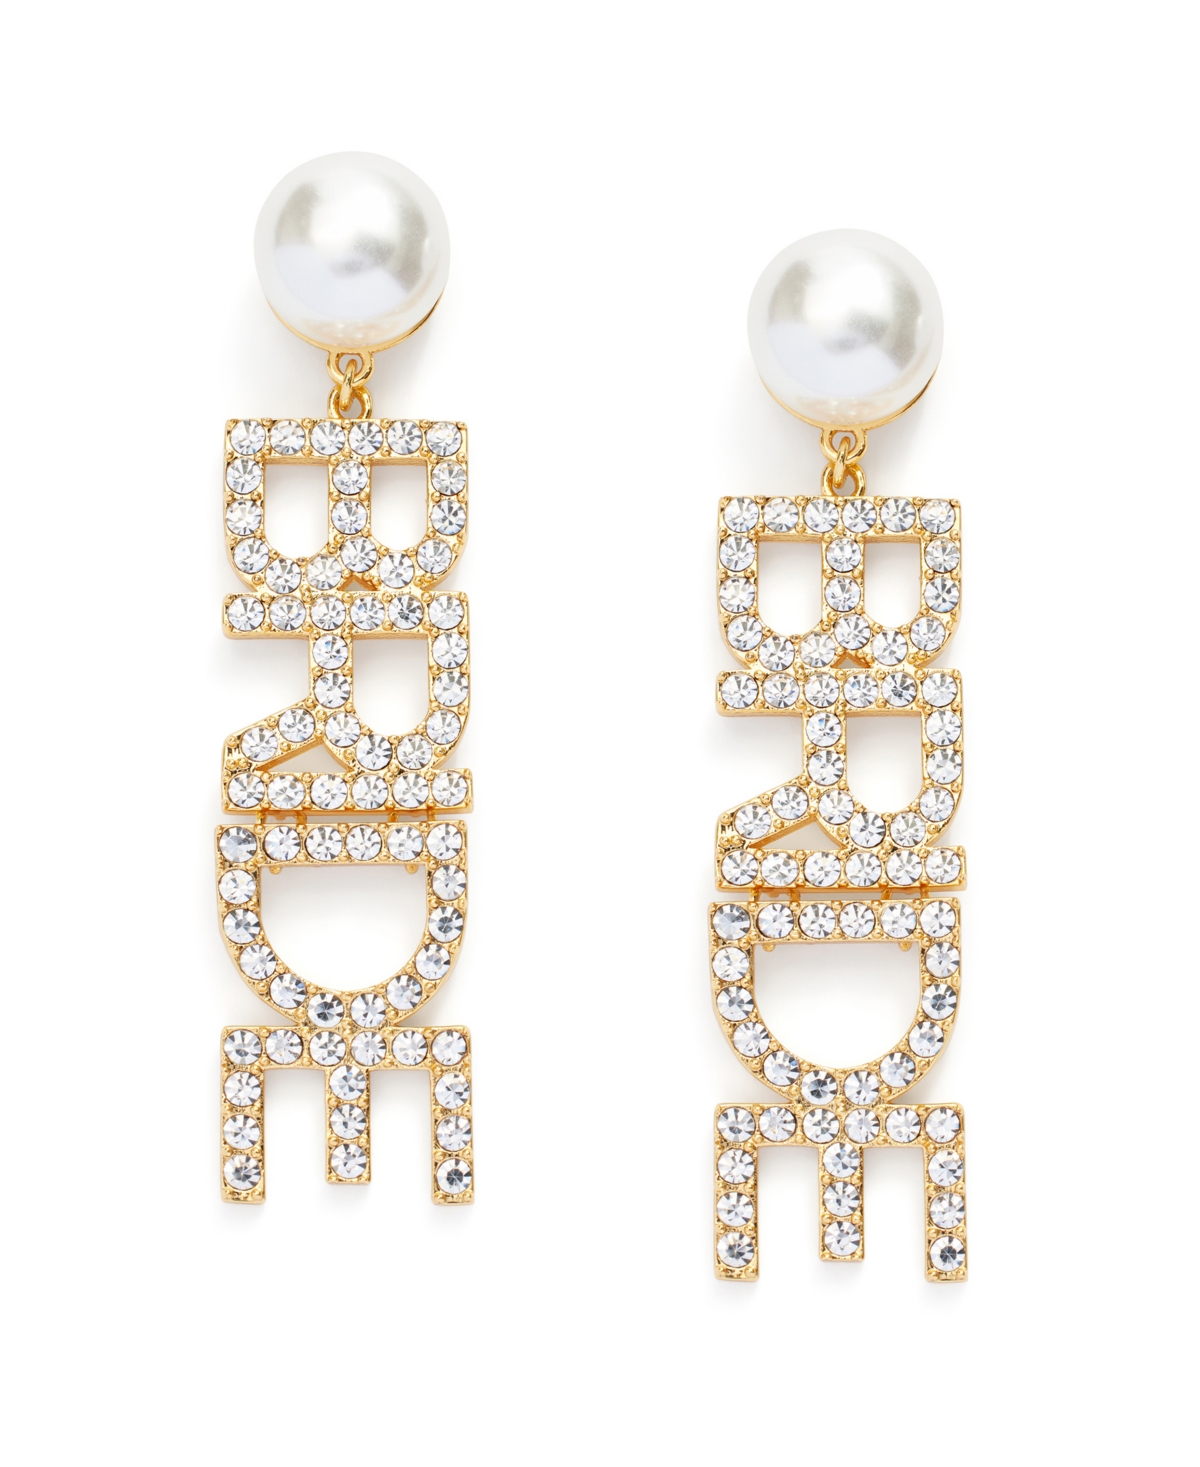 Faux Stone Pave Bride Statement Drop Earrings - Crystal, Gold